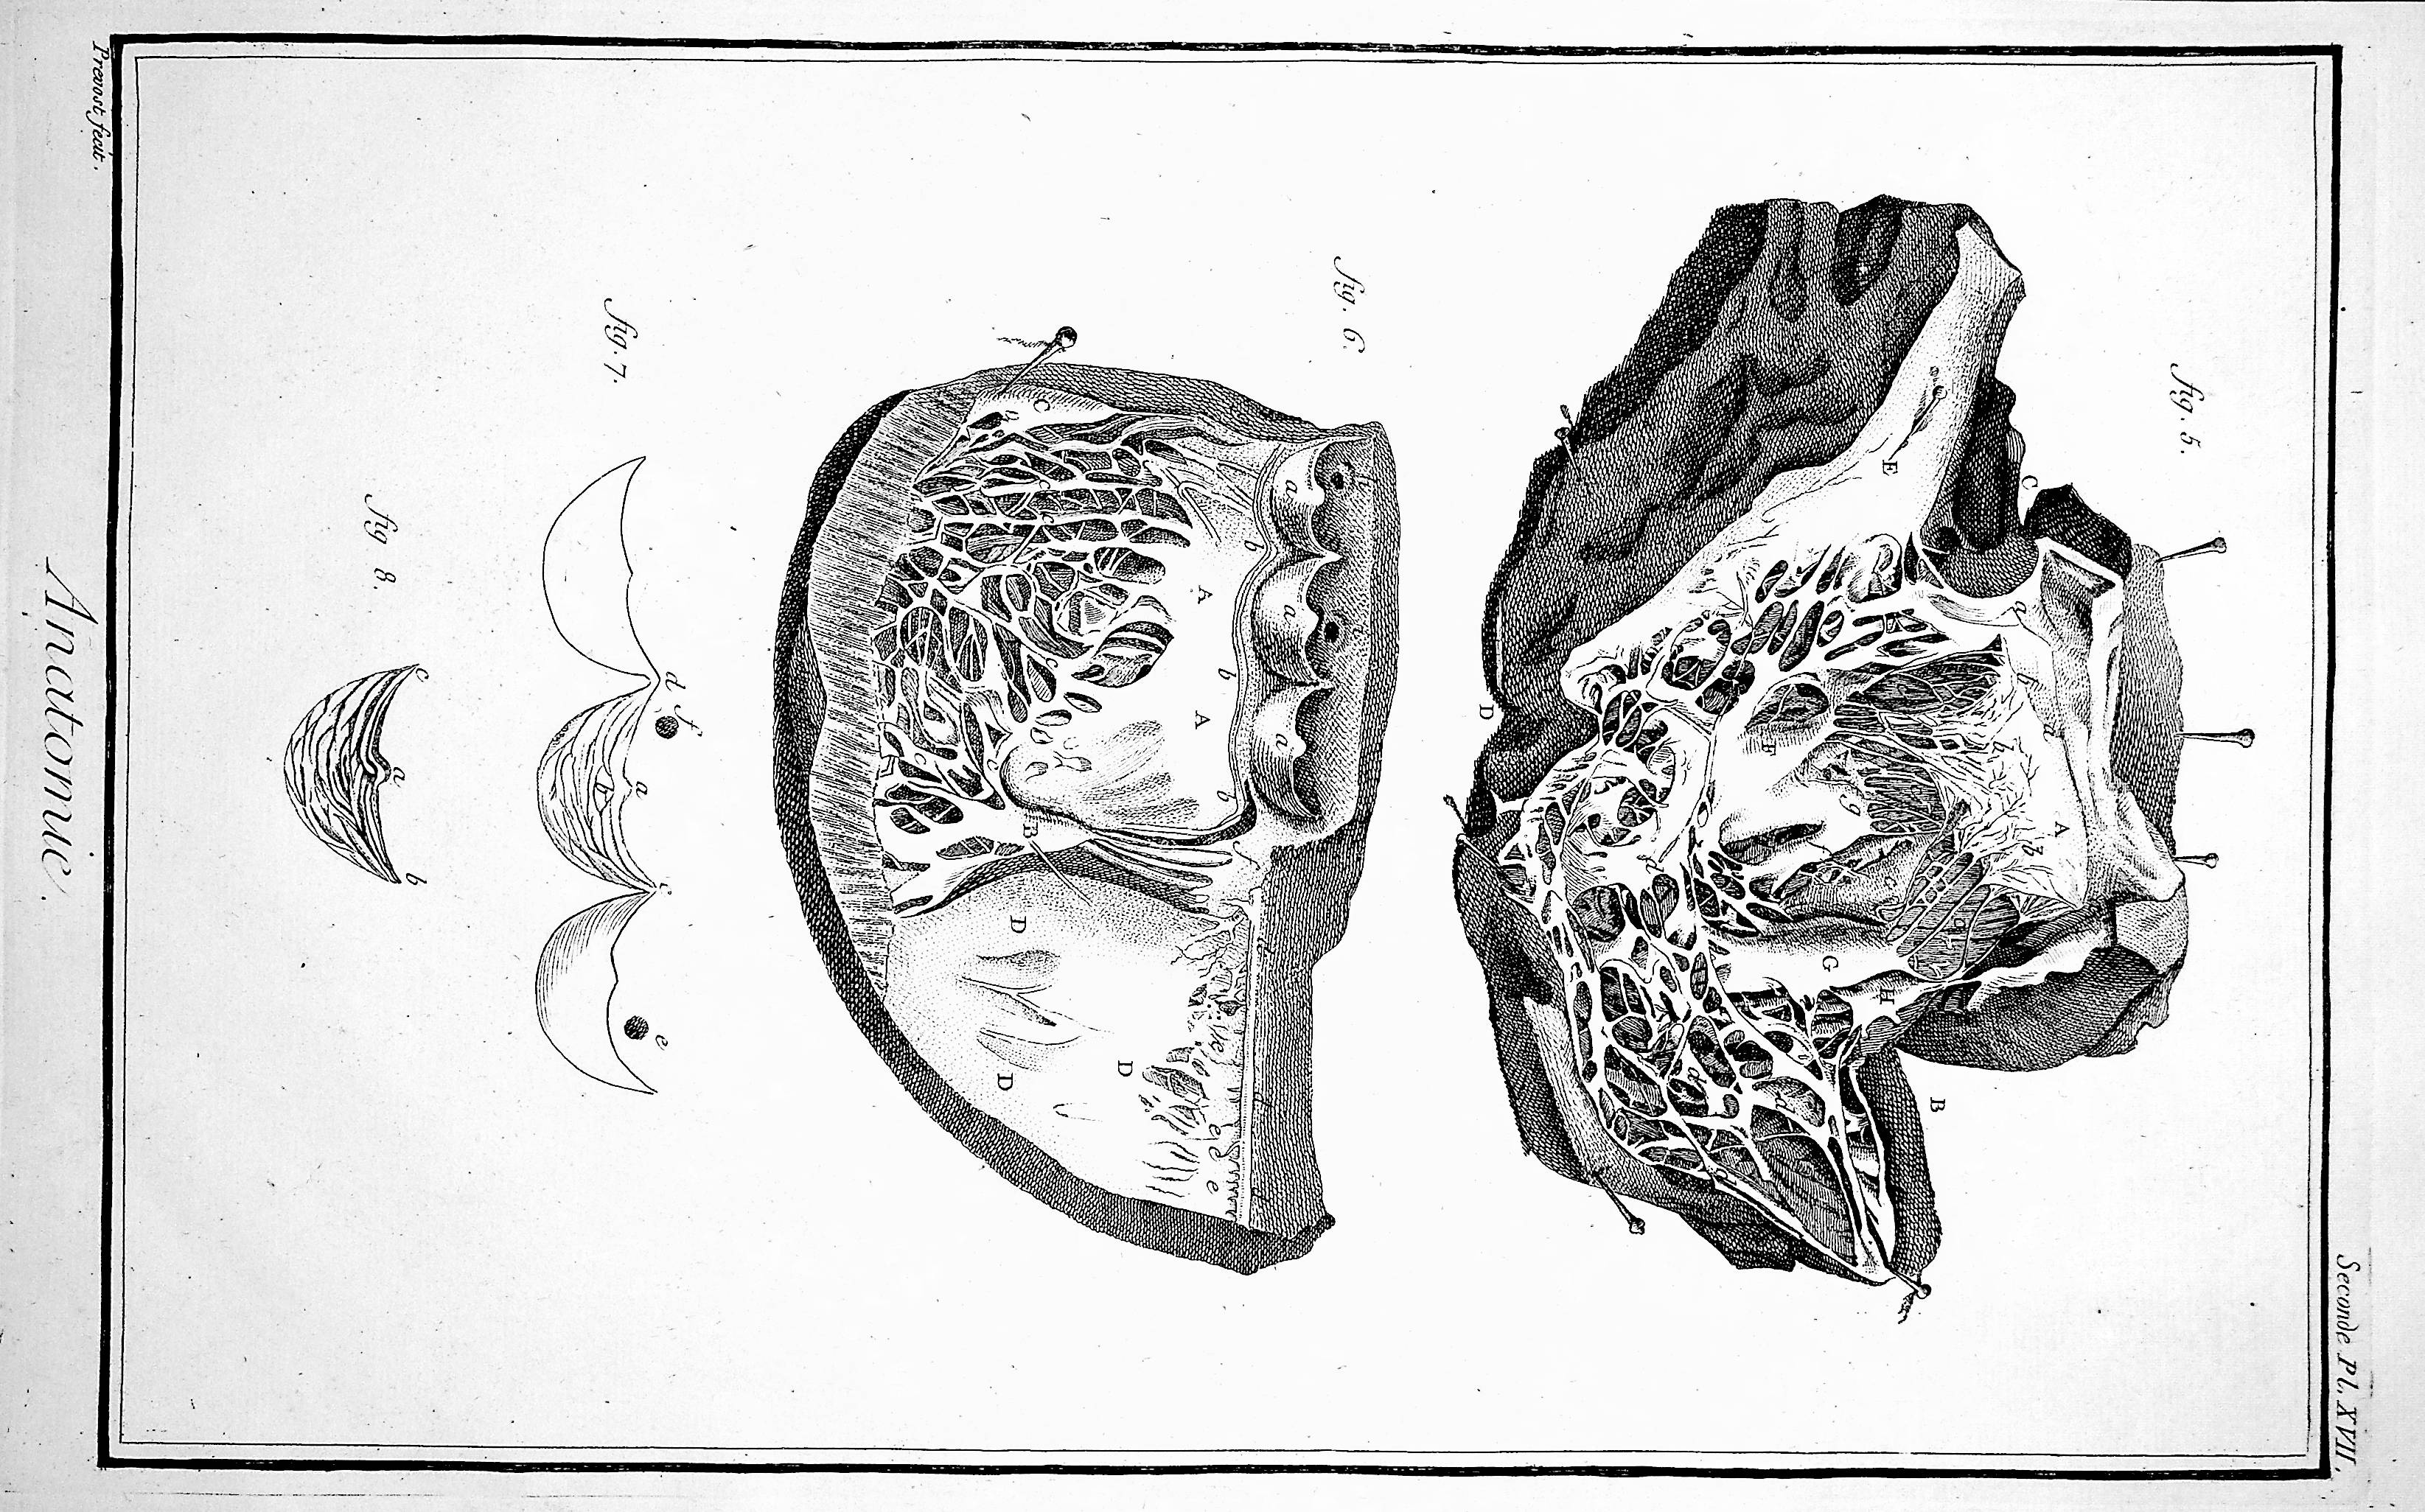 Image for Encyclopedie, Anatomie Plate XVII. The heart, after Mr. Senac; TOGETHER WITH Plate XVII No 2. Details of the heart, after Mr. Senac